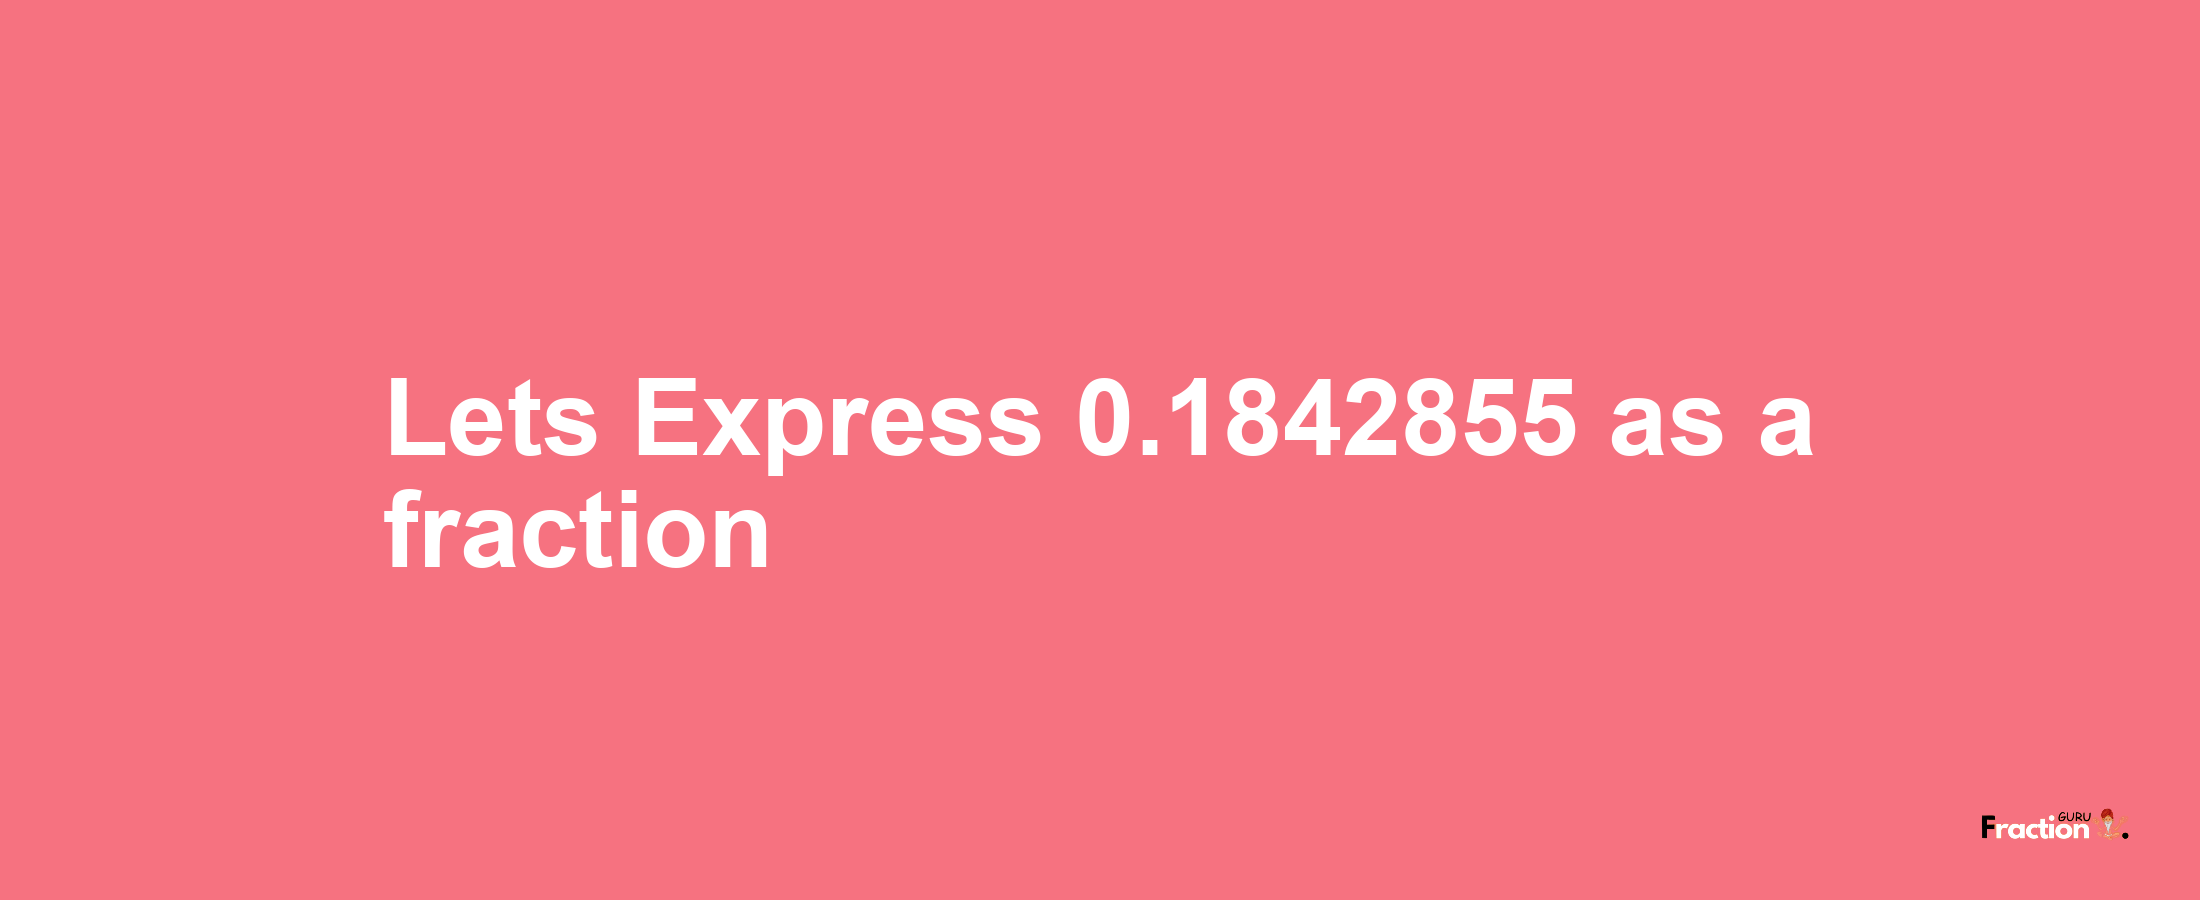 Lets Express 0.1842855 as afraction